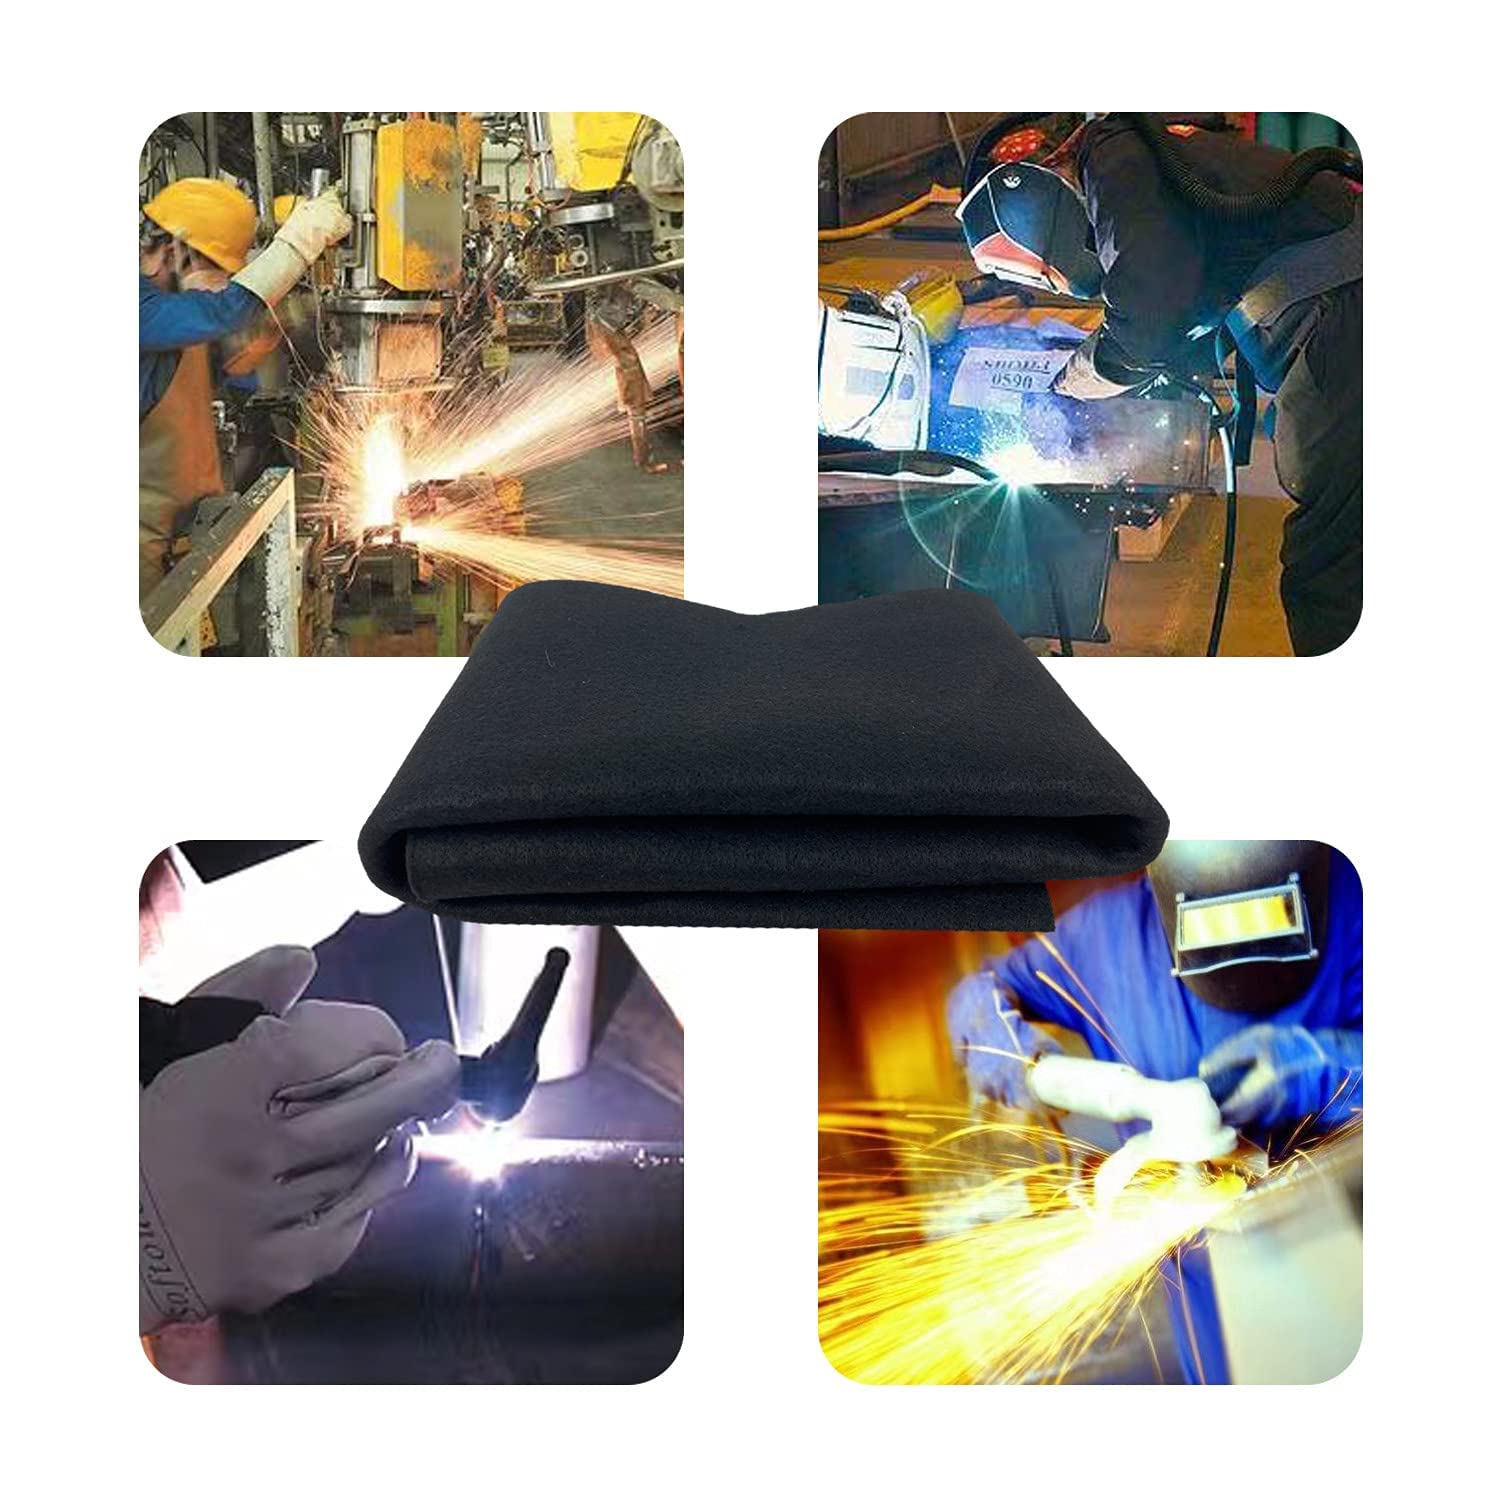 LU-DILAUNK Welding Blanket High Temperature Resistant up to 1800°F Fireproof Fabric Protect from Fire Heat Spark Protection Welding Pad Fireproof Mat